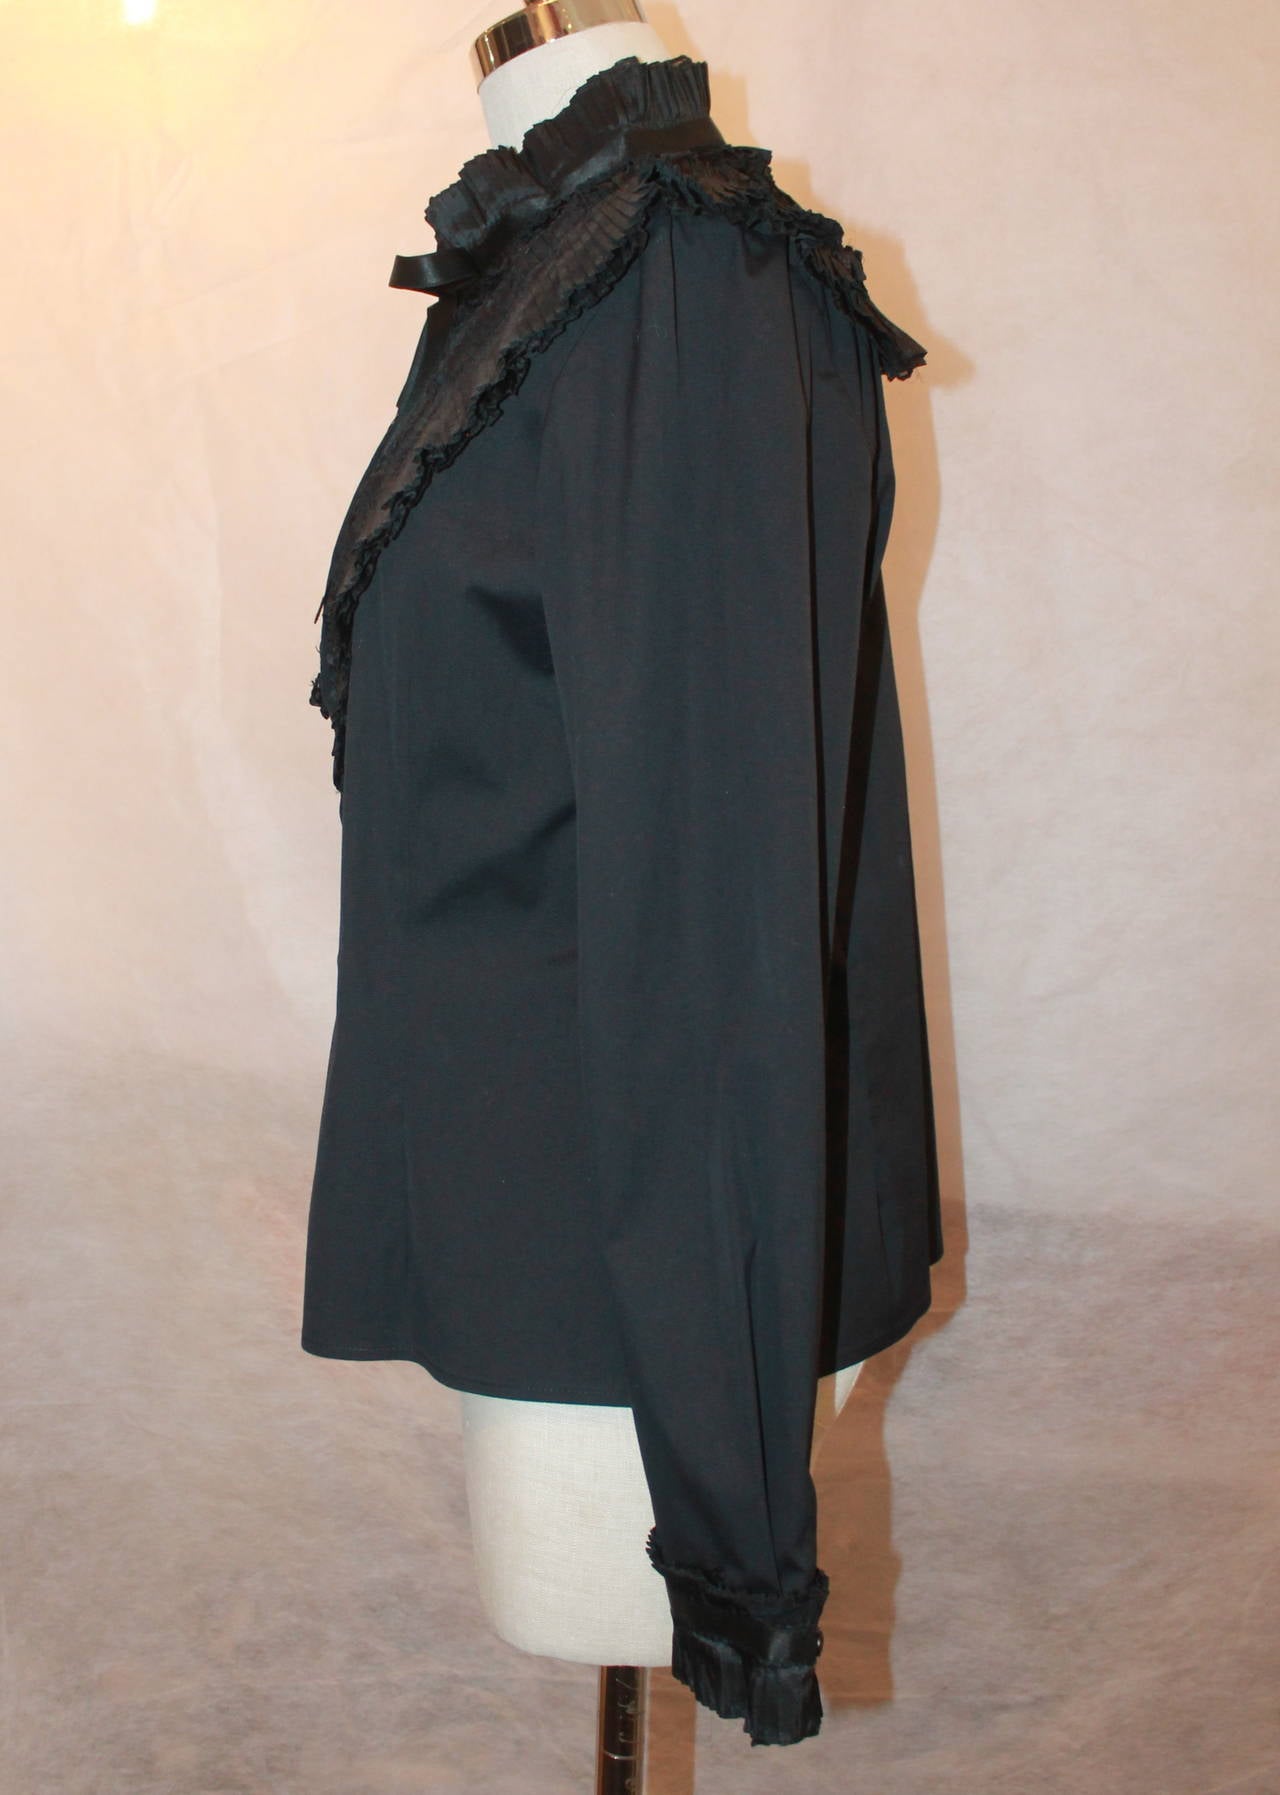 Oscar de la Renta Black Peasant Style Top with Pleating - M In Good Condition For Sale In West Palm Beach, FL